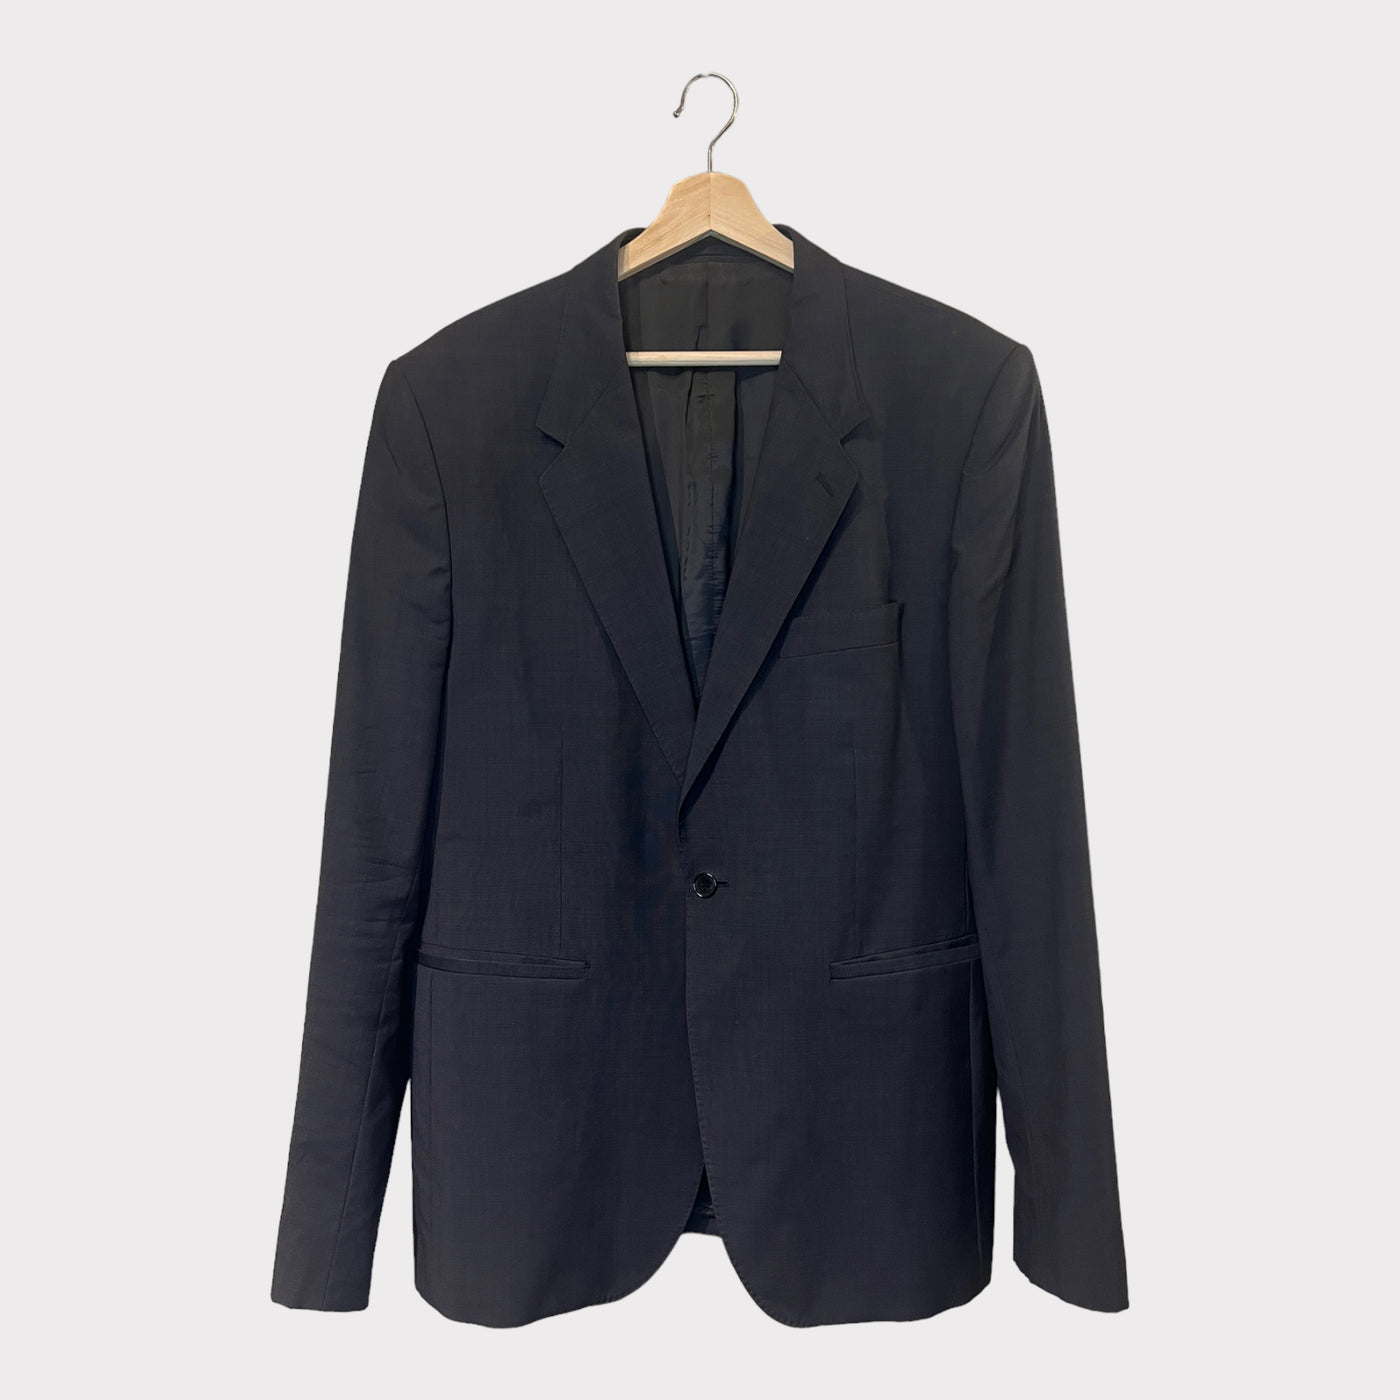 Tailored Blazer Jacket From Acne Jeans - Front